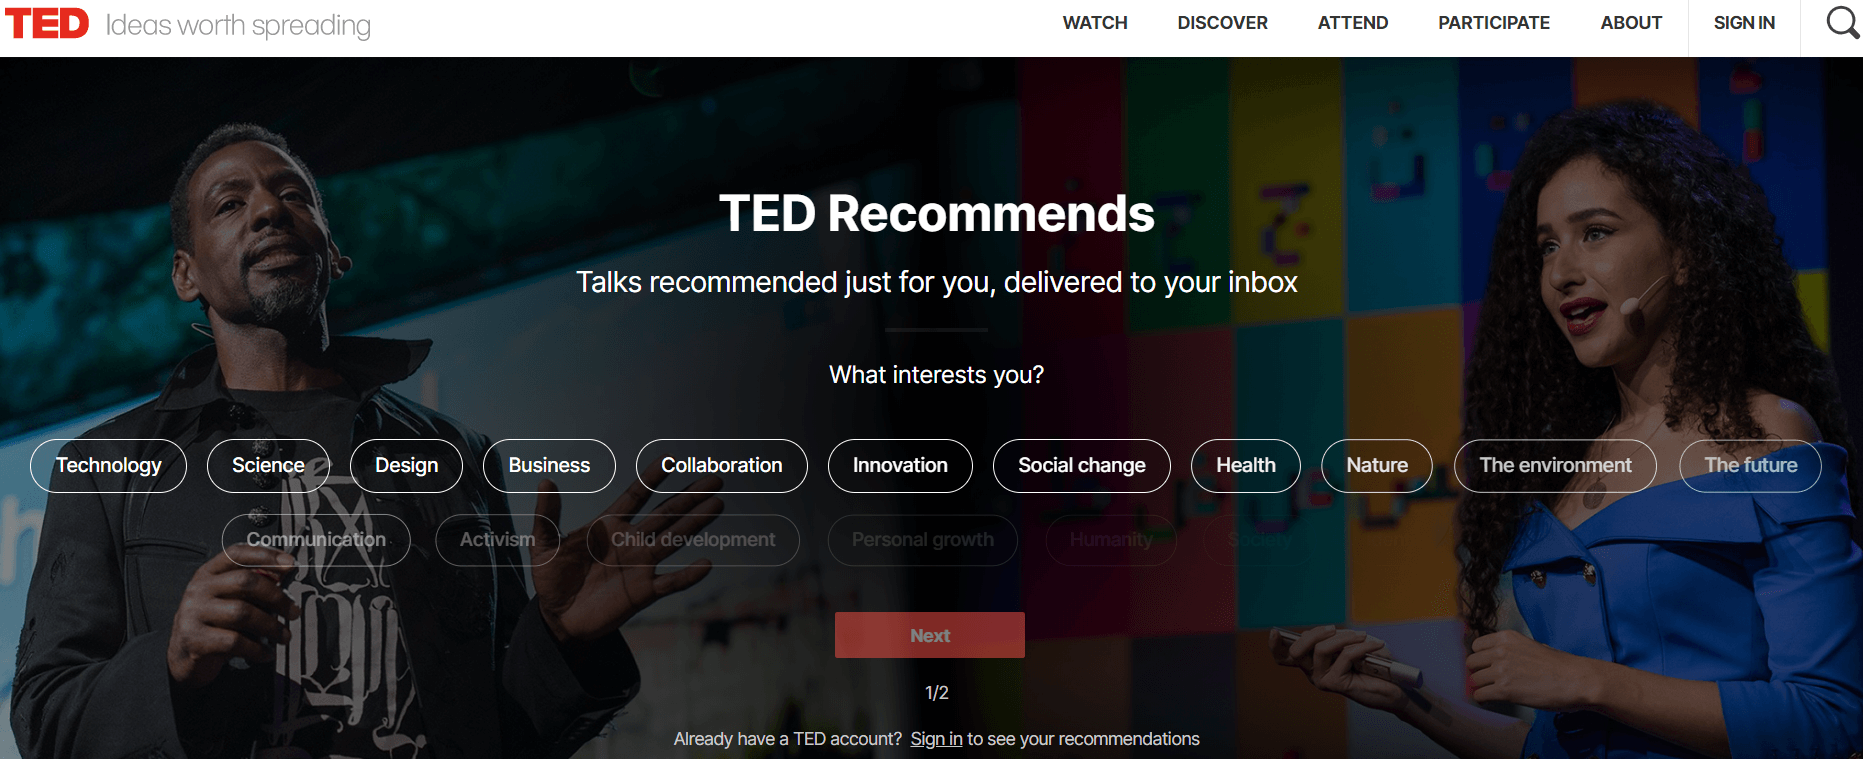 ted-7701817